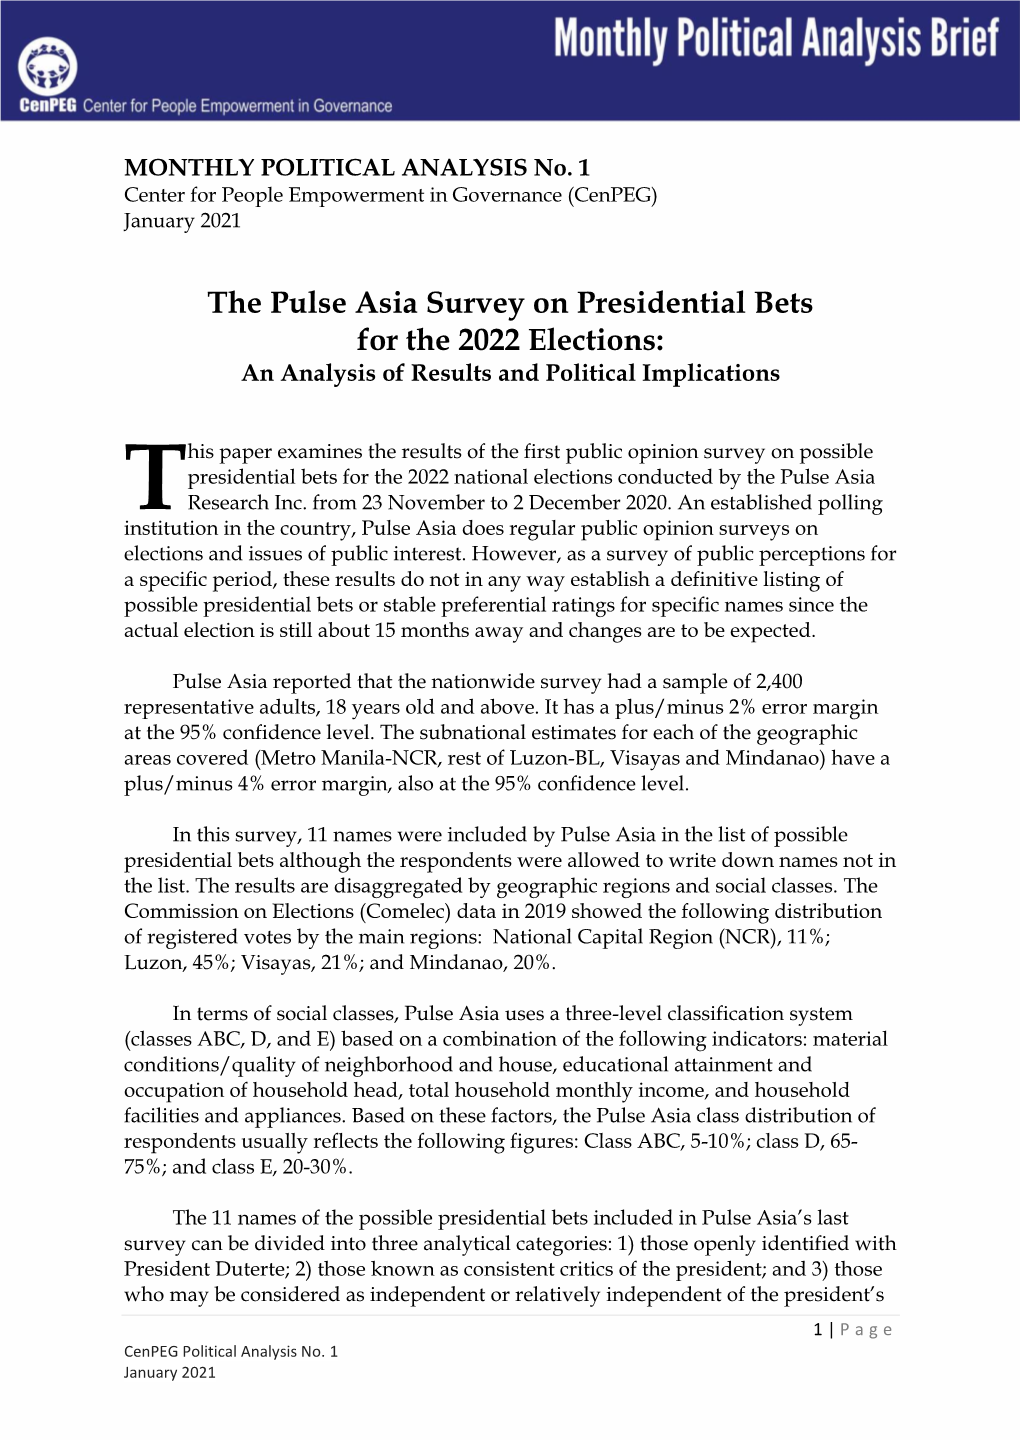 The Pulse Asia Survey on Presidential Bets for the 2022 Elections: an Analysis of Results and Political Implications